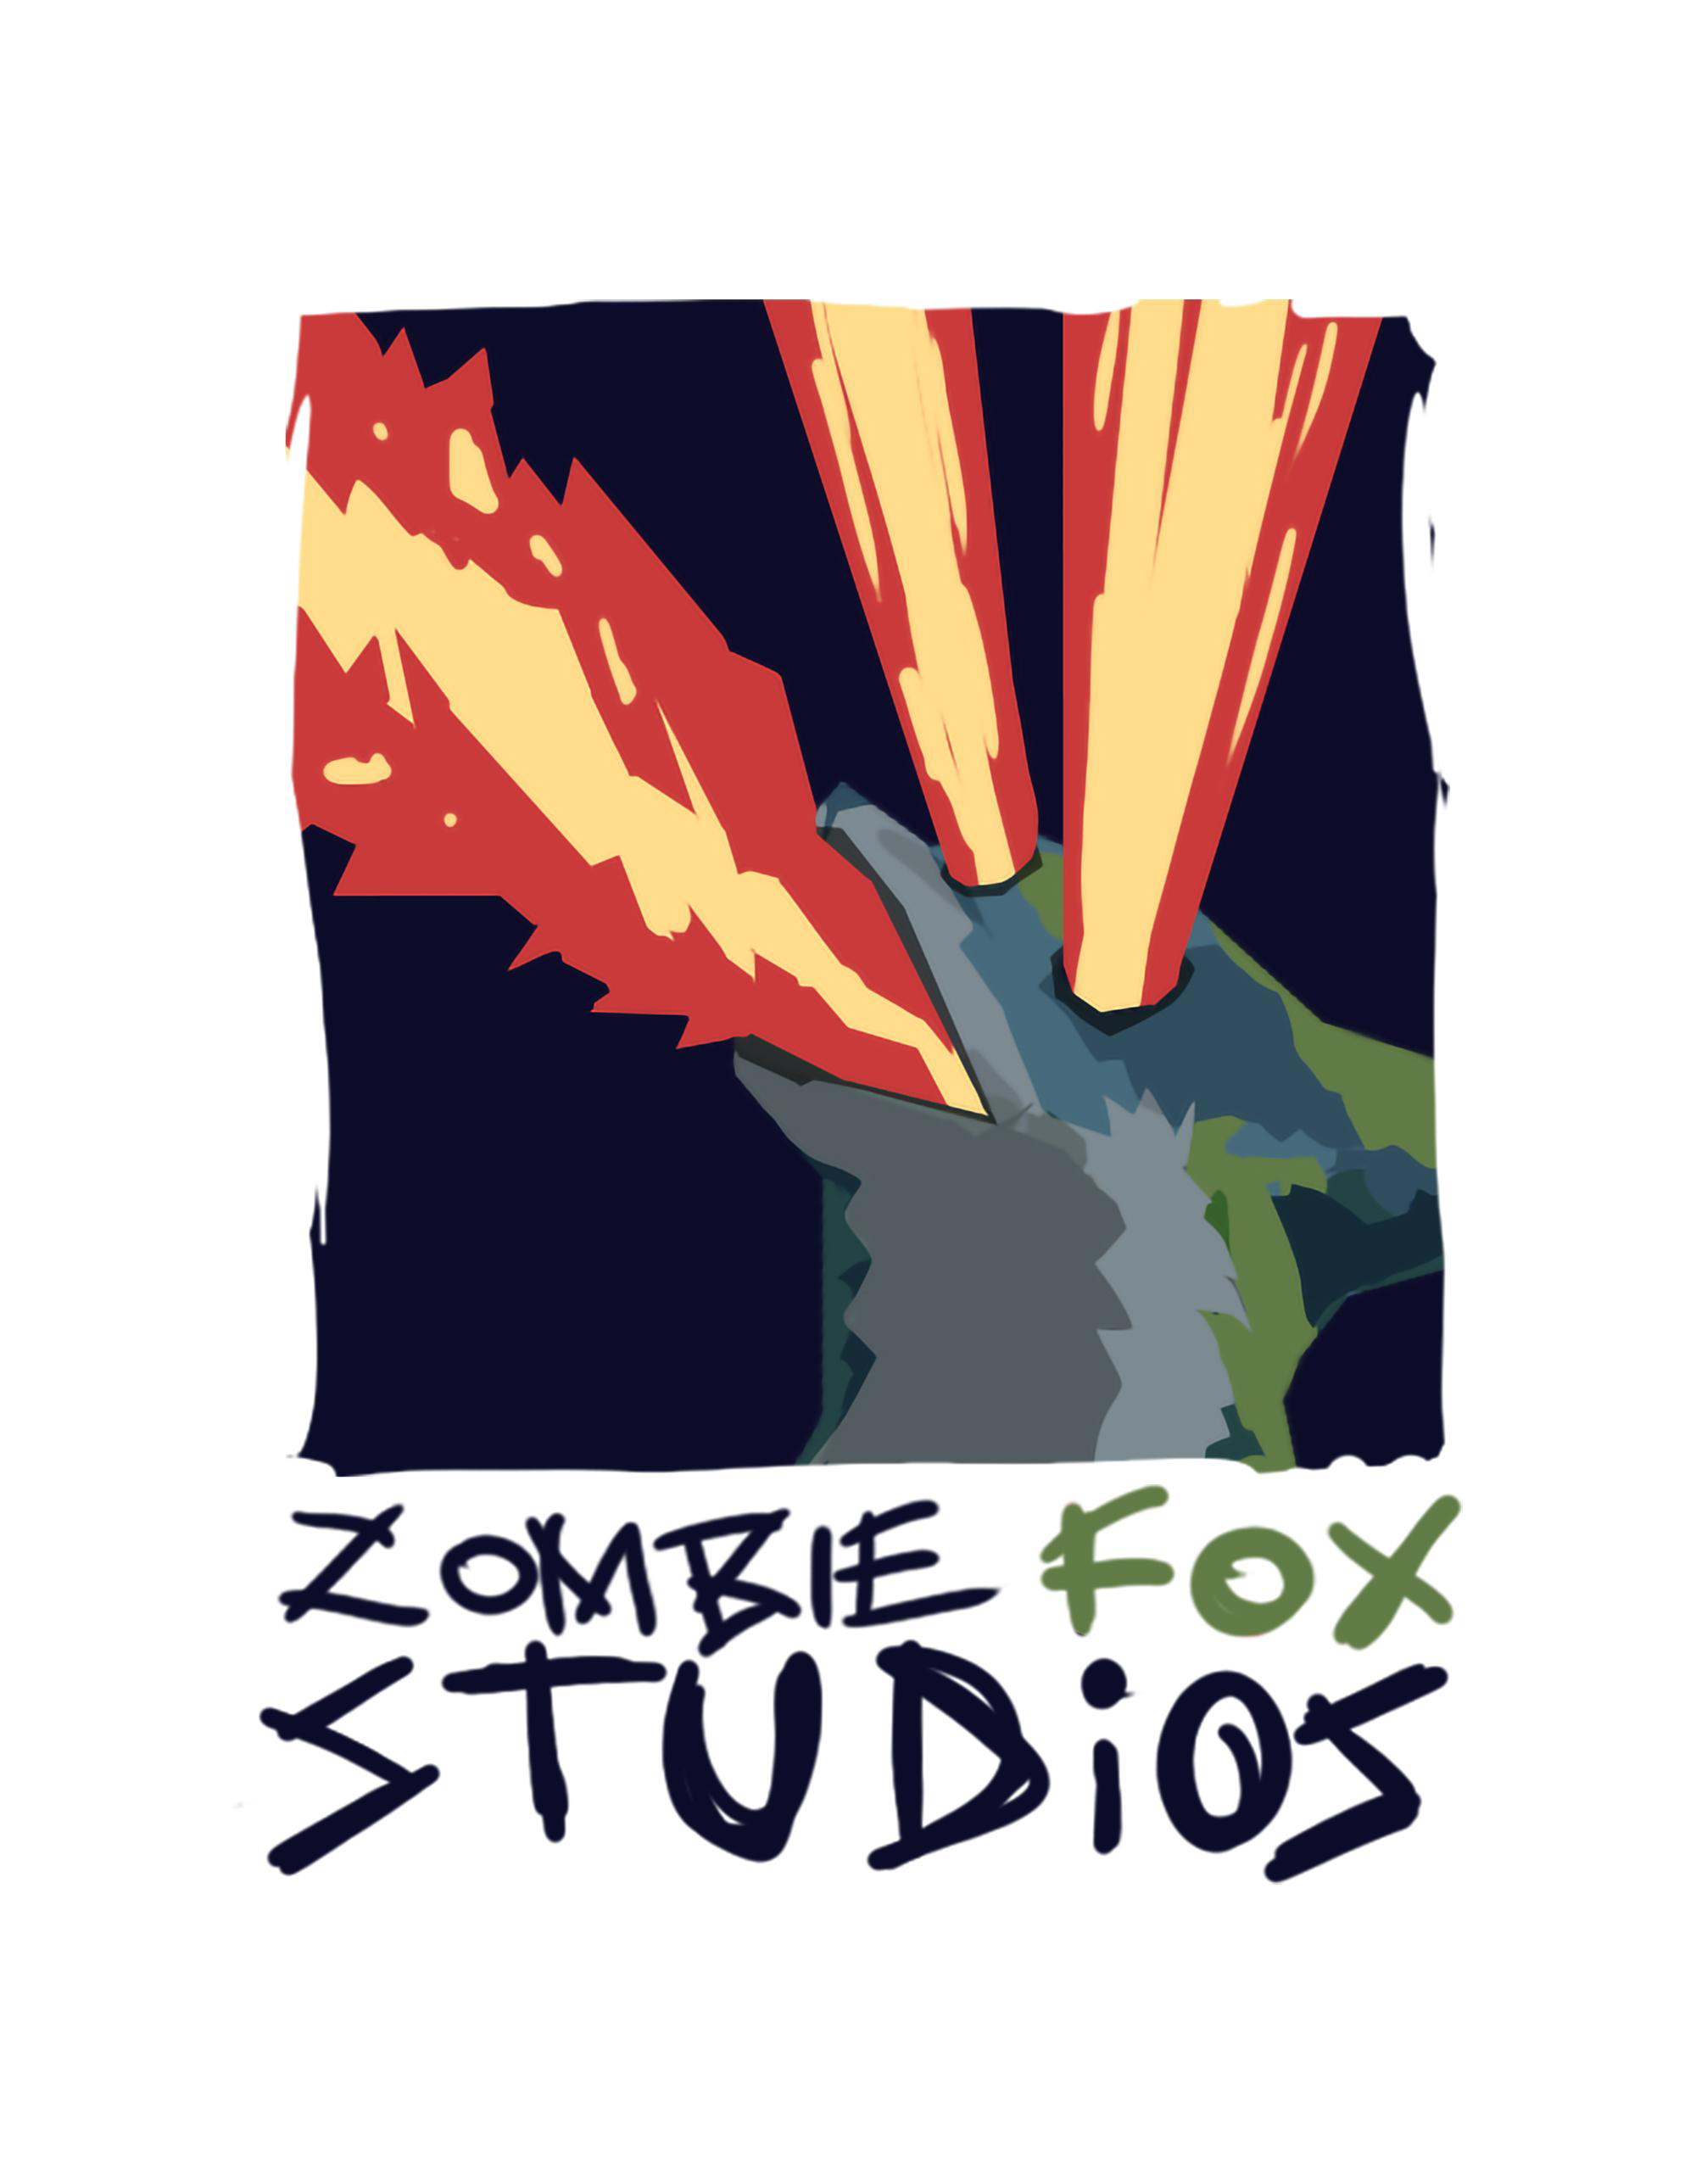 Zombiefox Studios - Crafty Games for the undead at heart